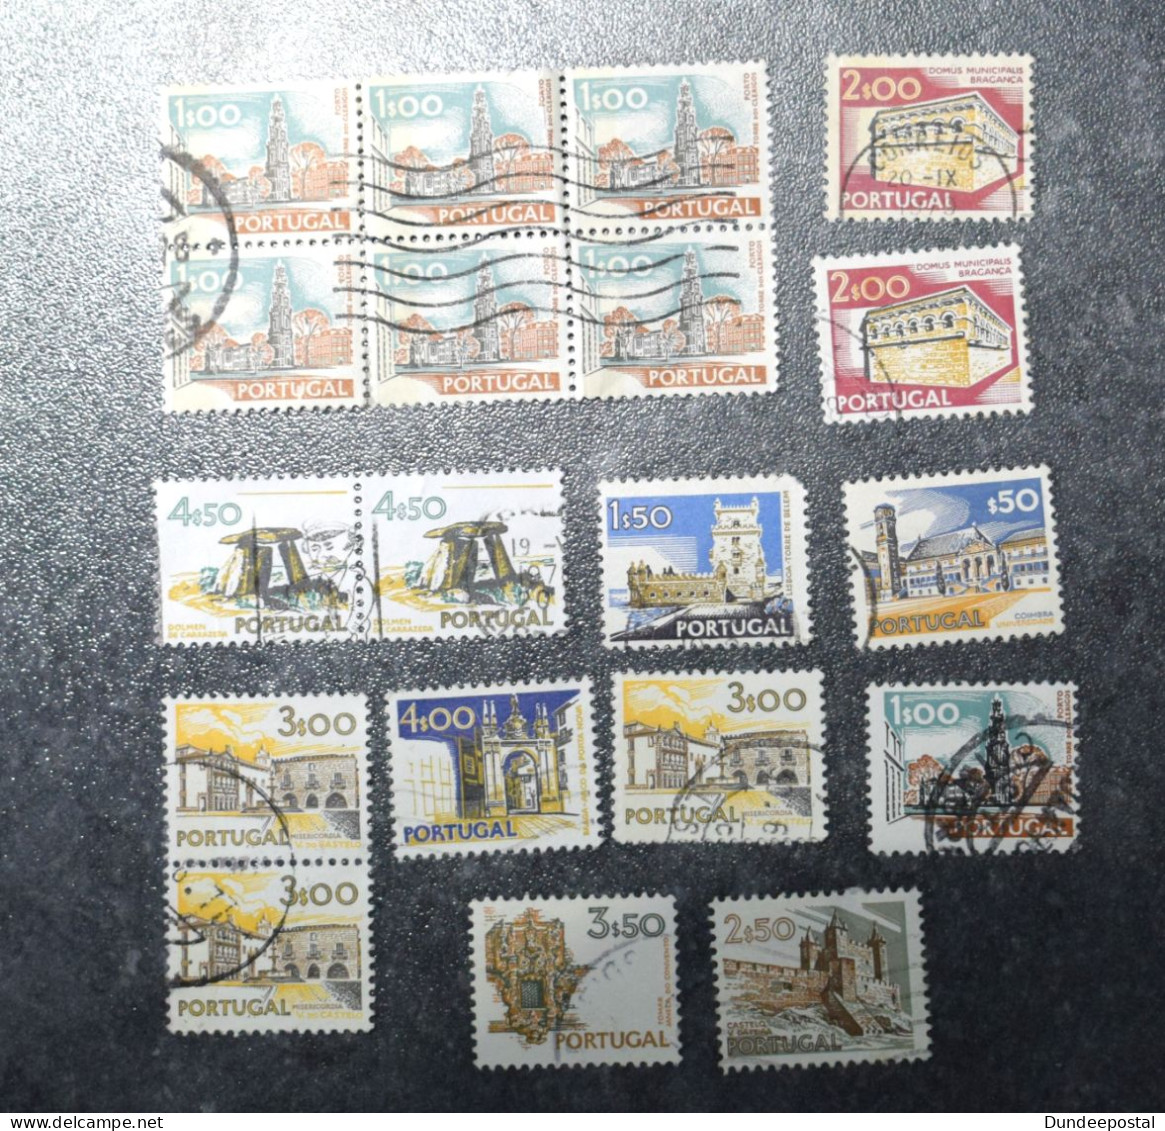 PORTUGAL STAMPS  Portugal Cities And Landscapes  1953 ~~L@@K~~ - Used Stamps